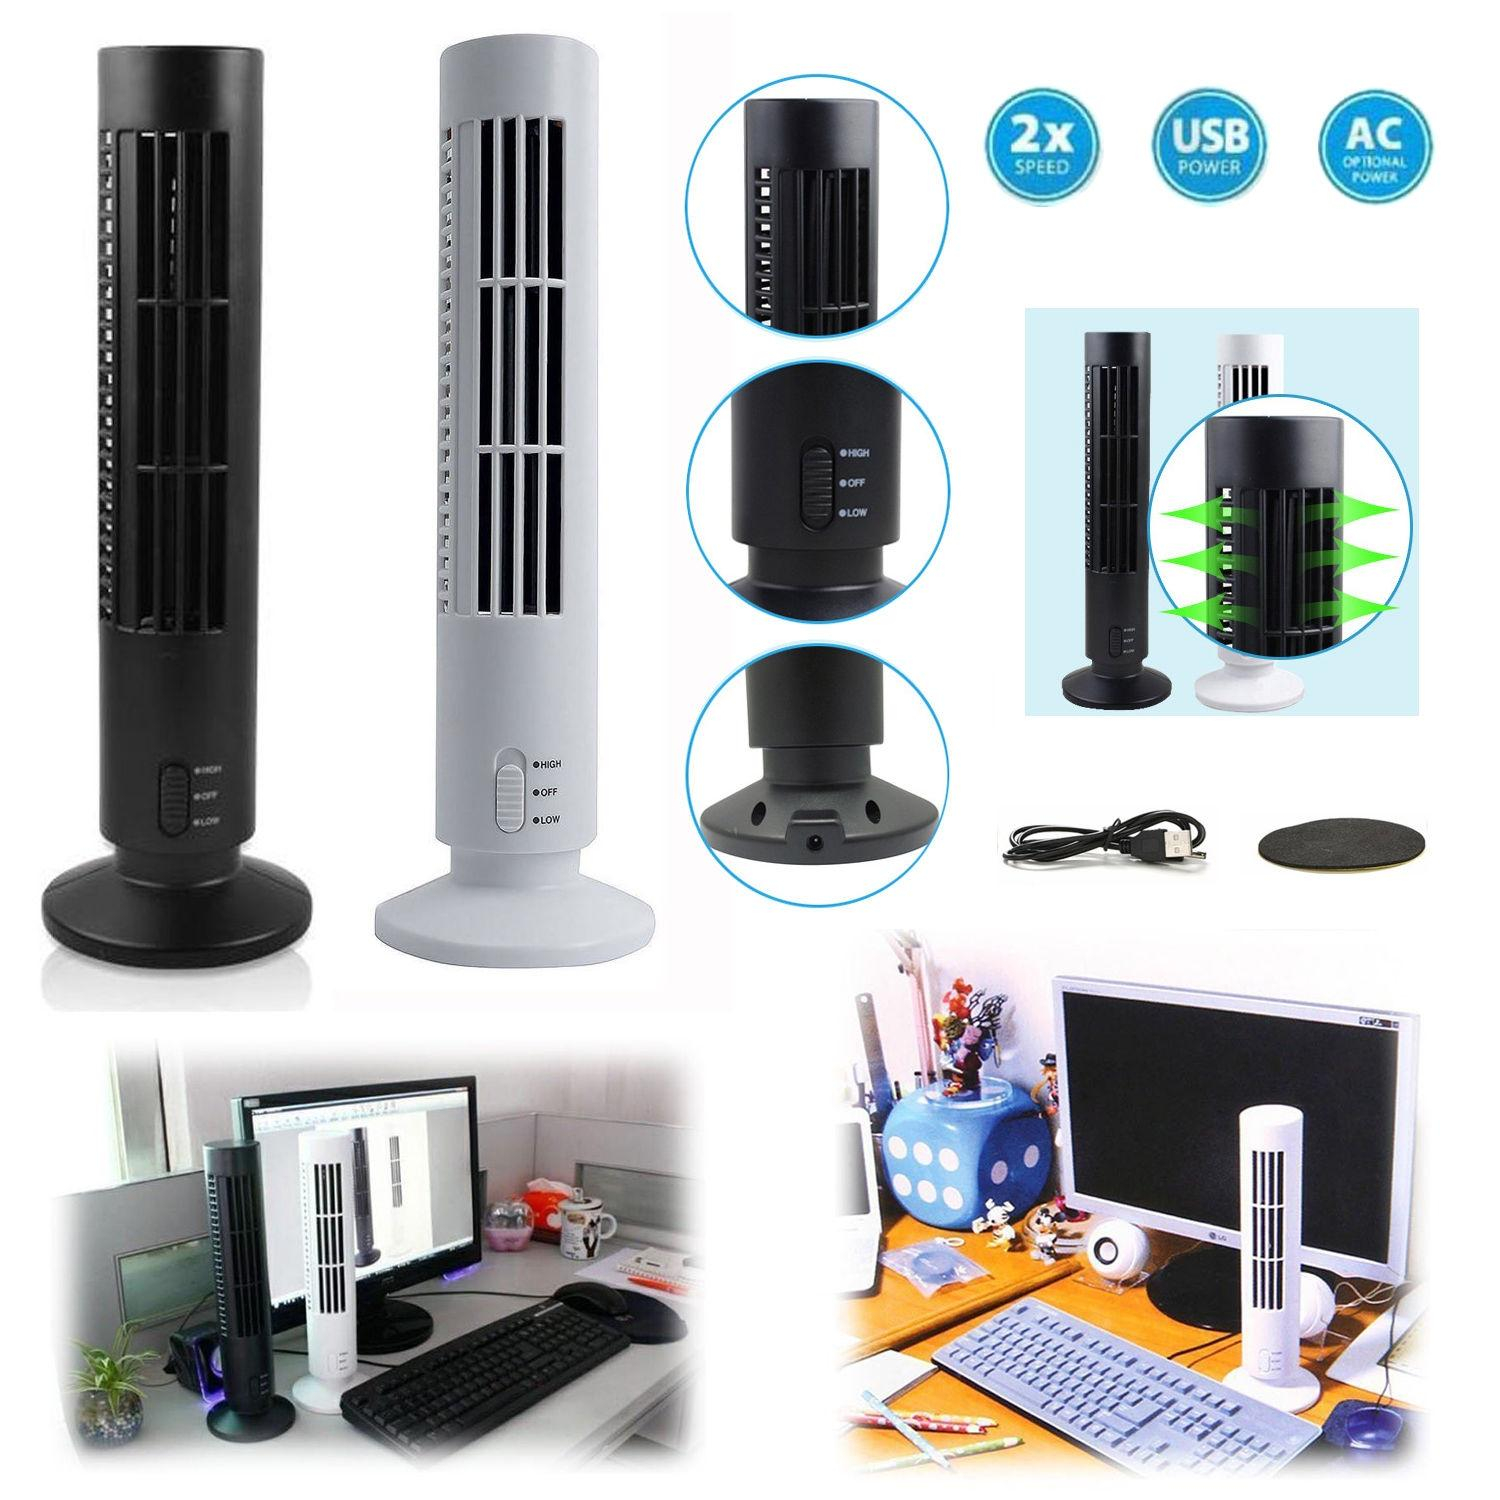 Us 235 60 Offeastvita Portable New Usb Vertical Bladeless Fan Mini Air Conditioner Fan Desk Cooling Tower Fan For Home Office 5v 25w Pc R10mini in proportions 1500 X 1500